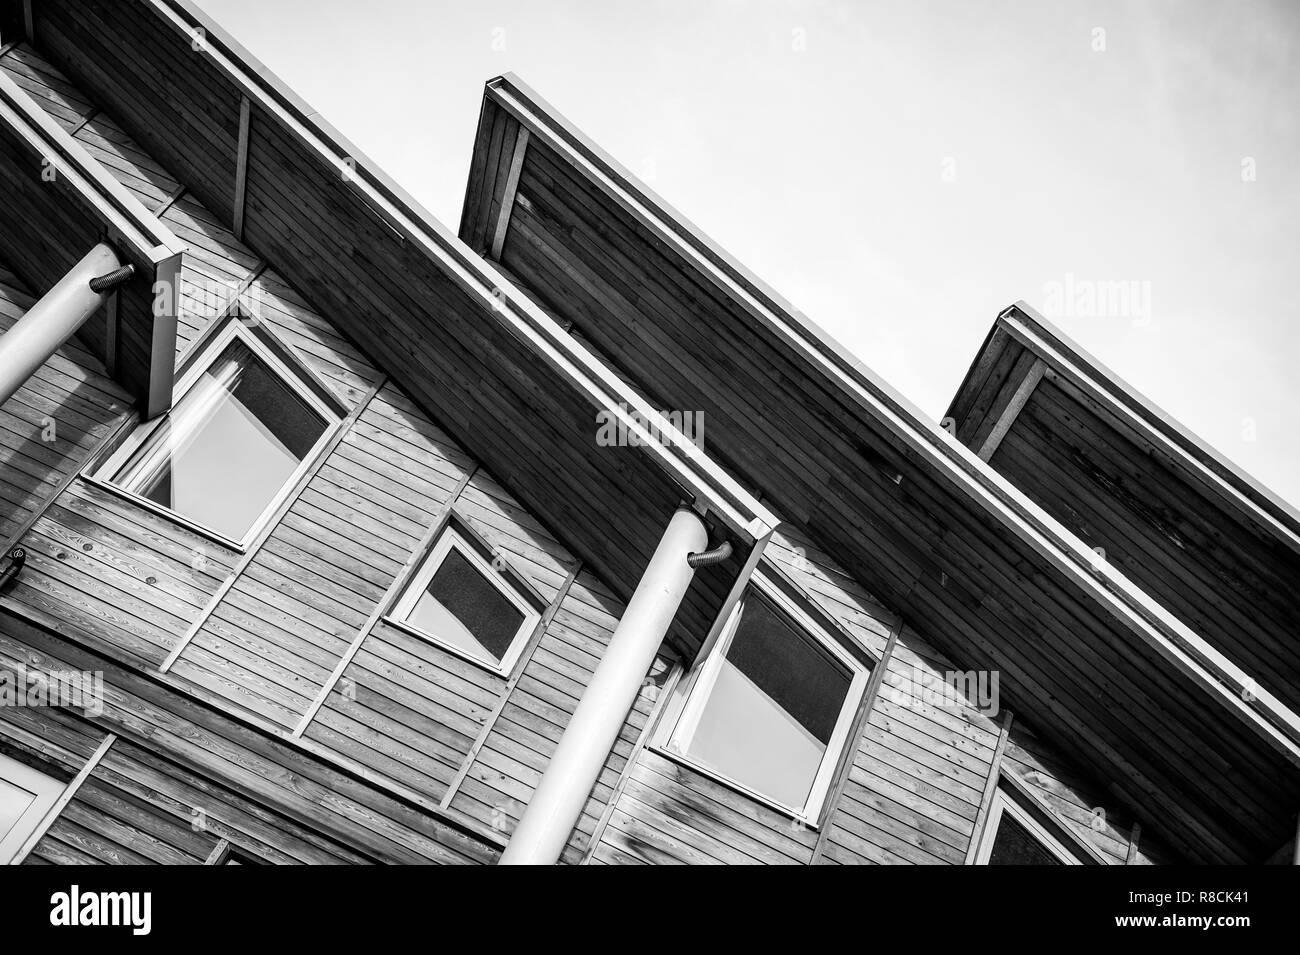 Angles on roofs and windows in living accommodation Stock Photo